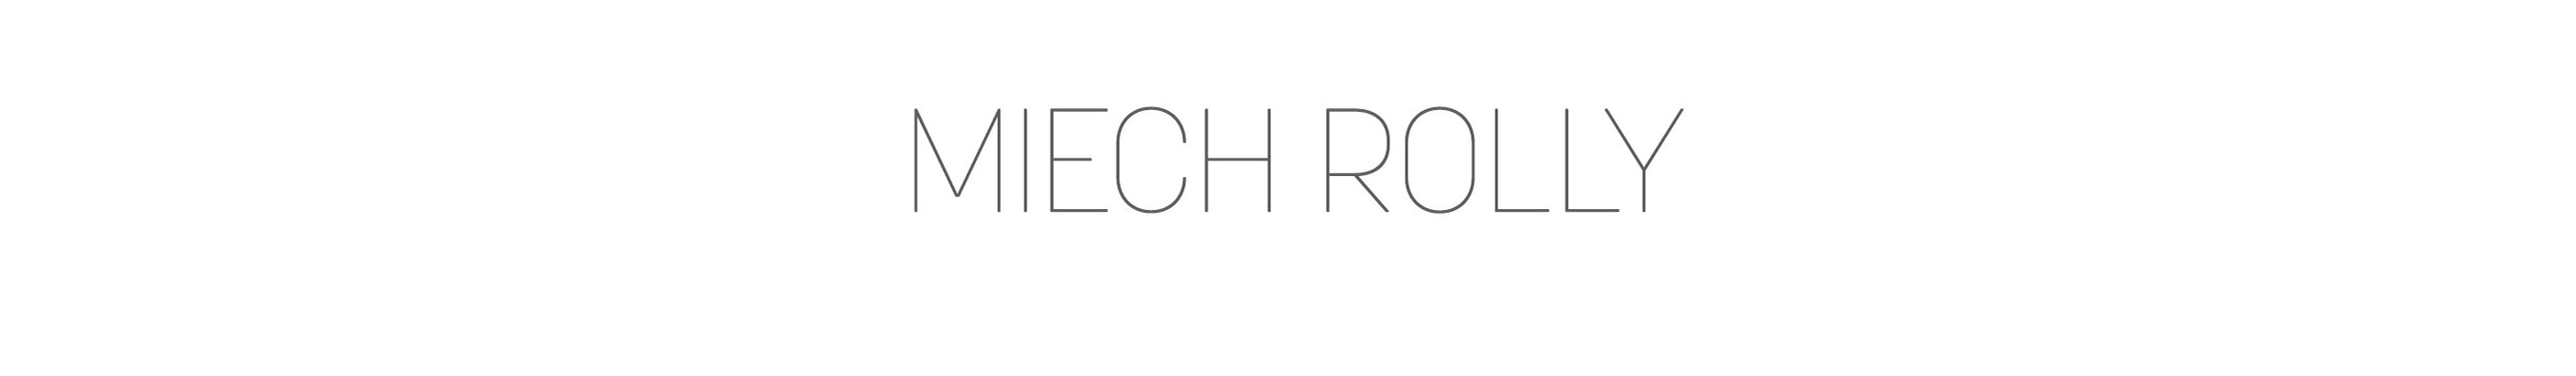 Miech Rolly's profile banner